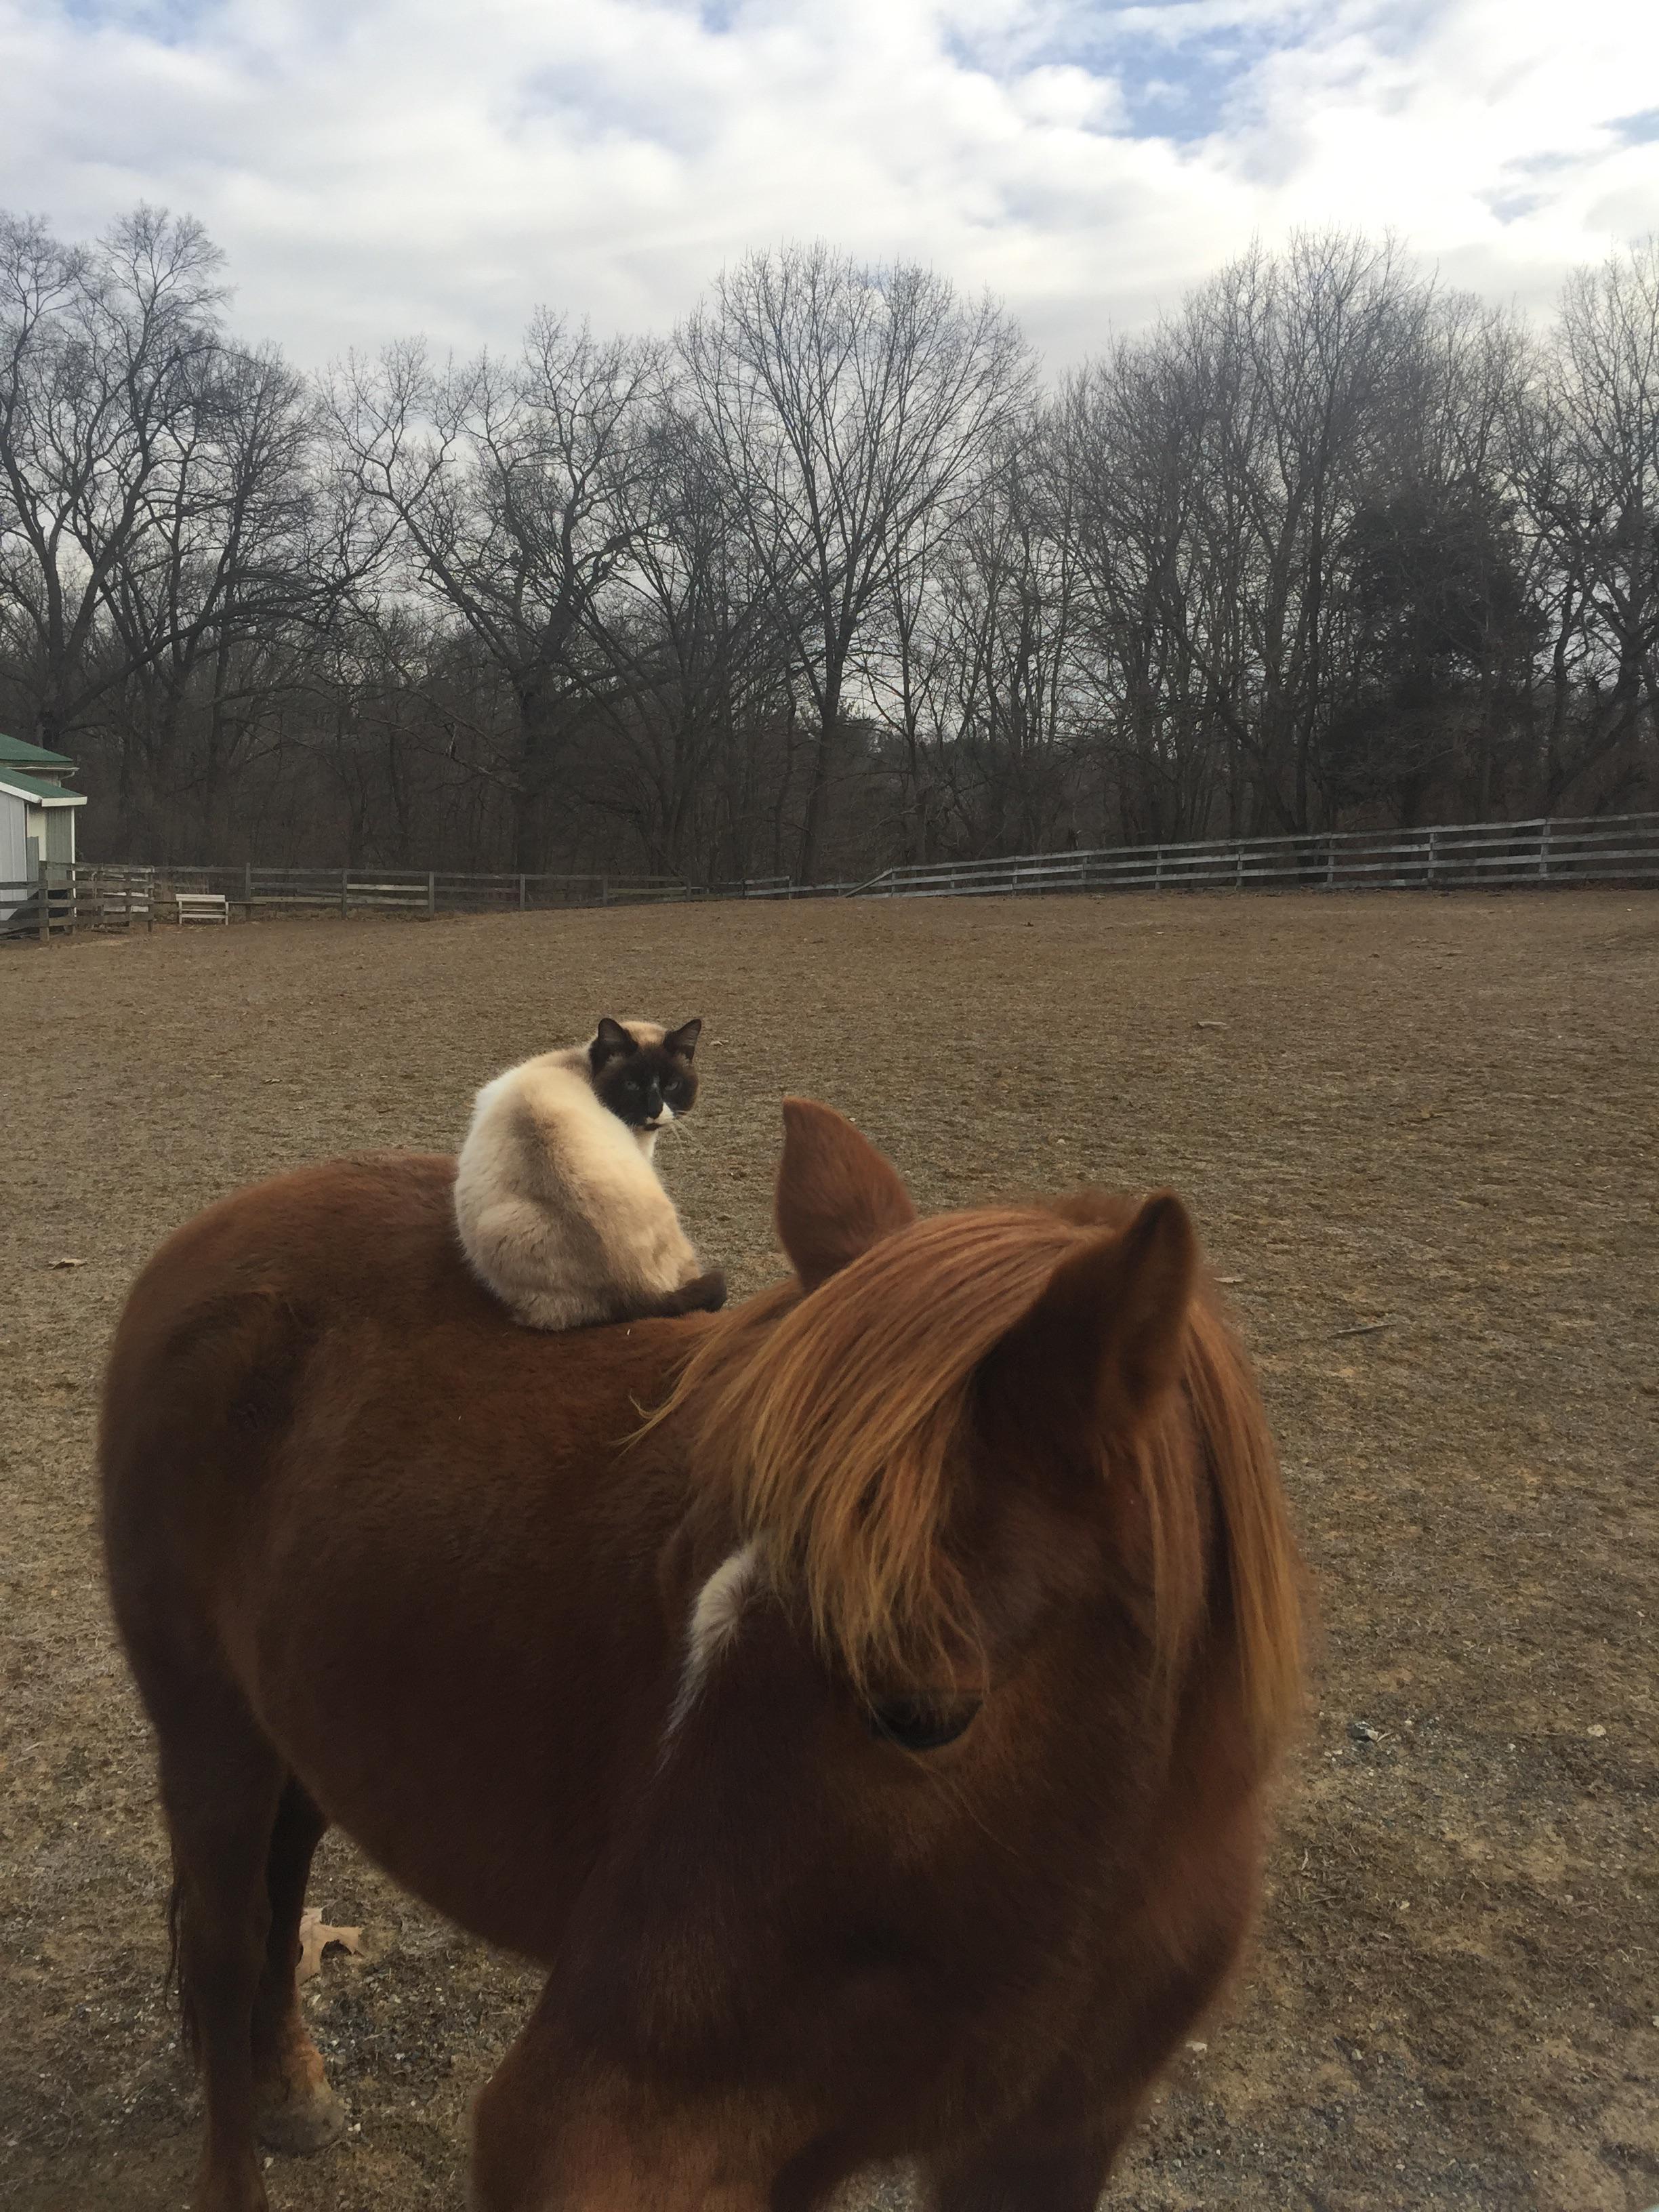 OC] My Barn Cat Sleeping on our Horses' Back to Keep Warm and Safe from  Foxes. : r/MadeMeSmile